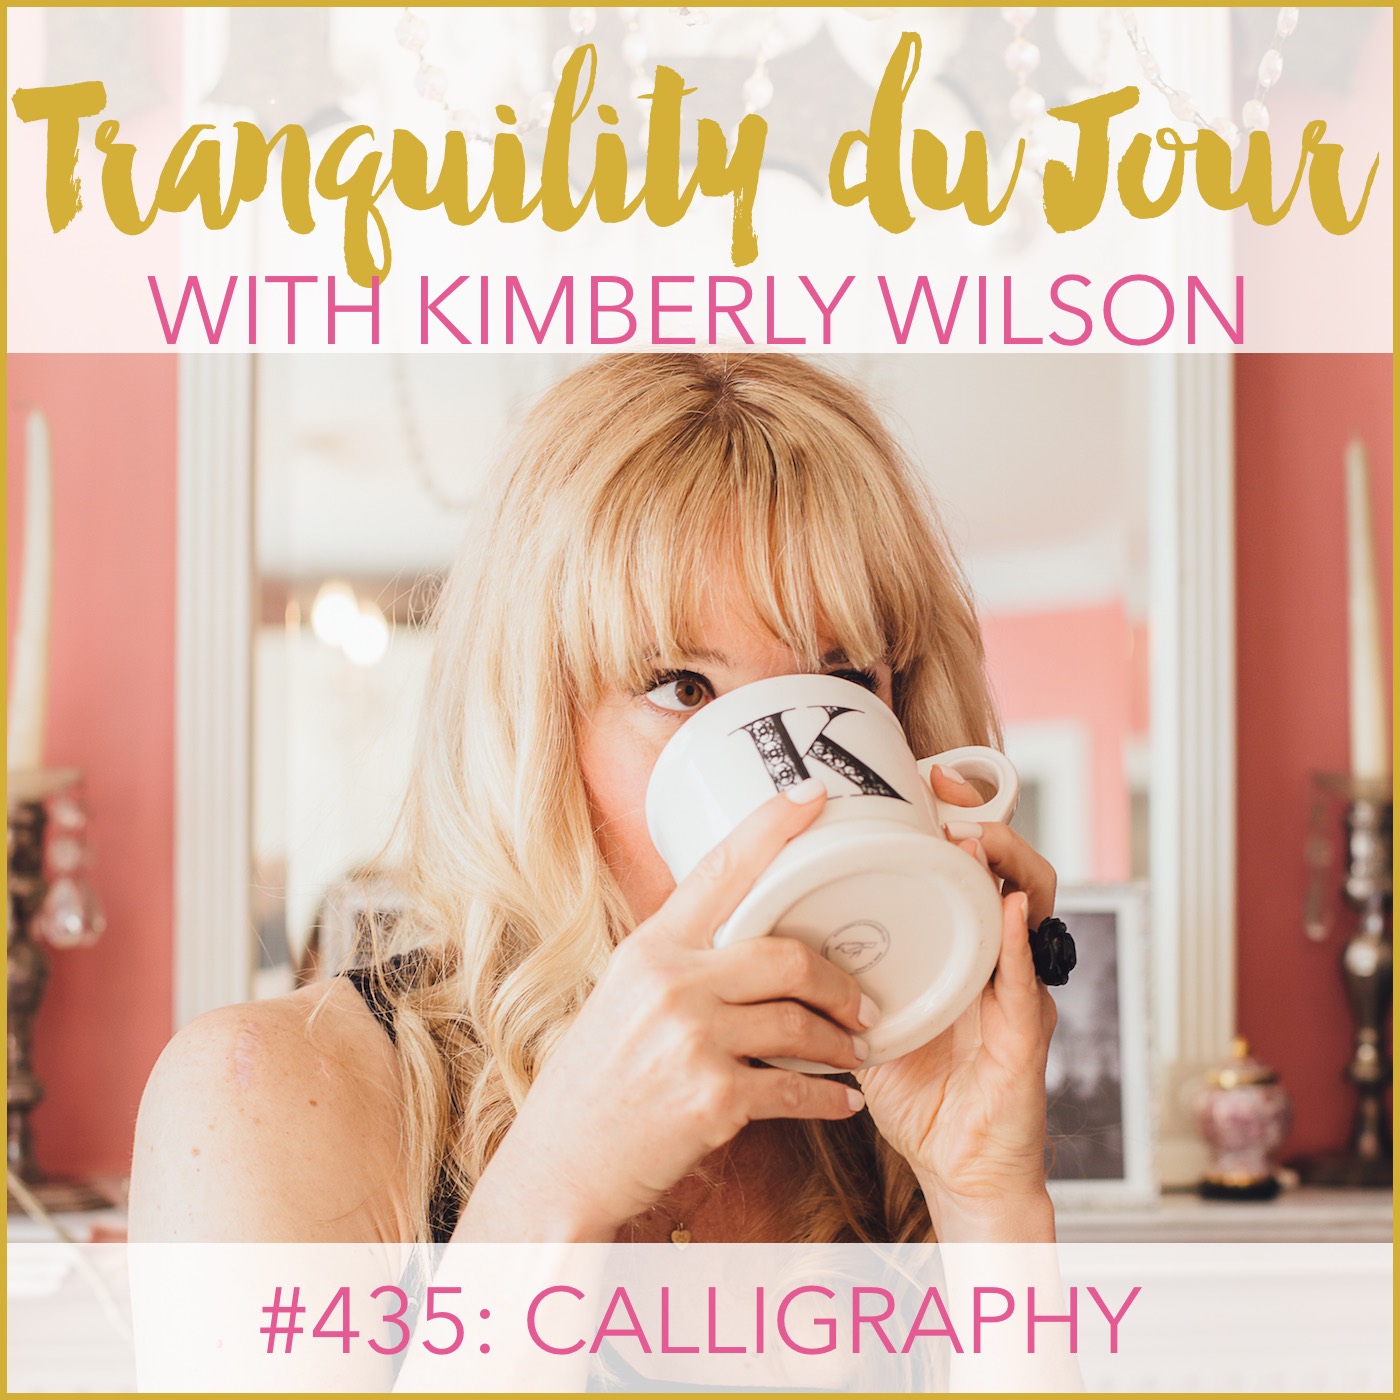 Tranquility du Jour #435: Calligraphy